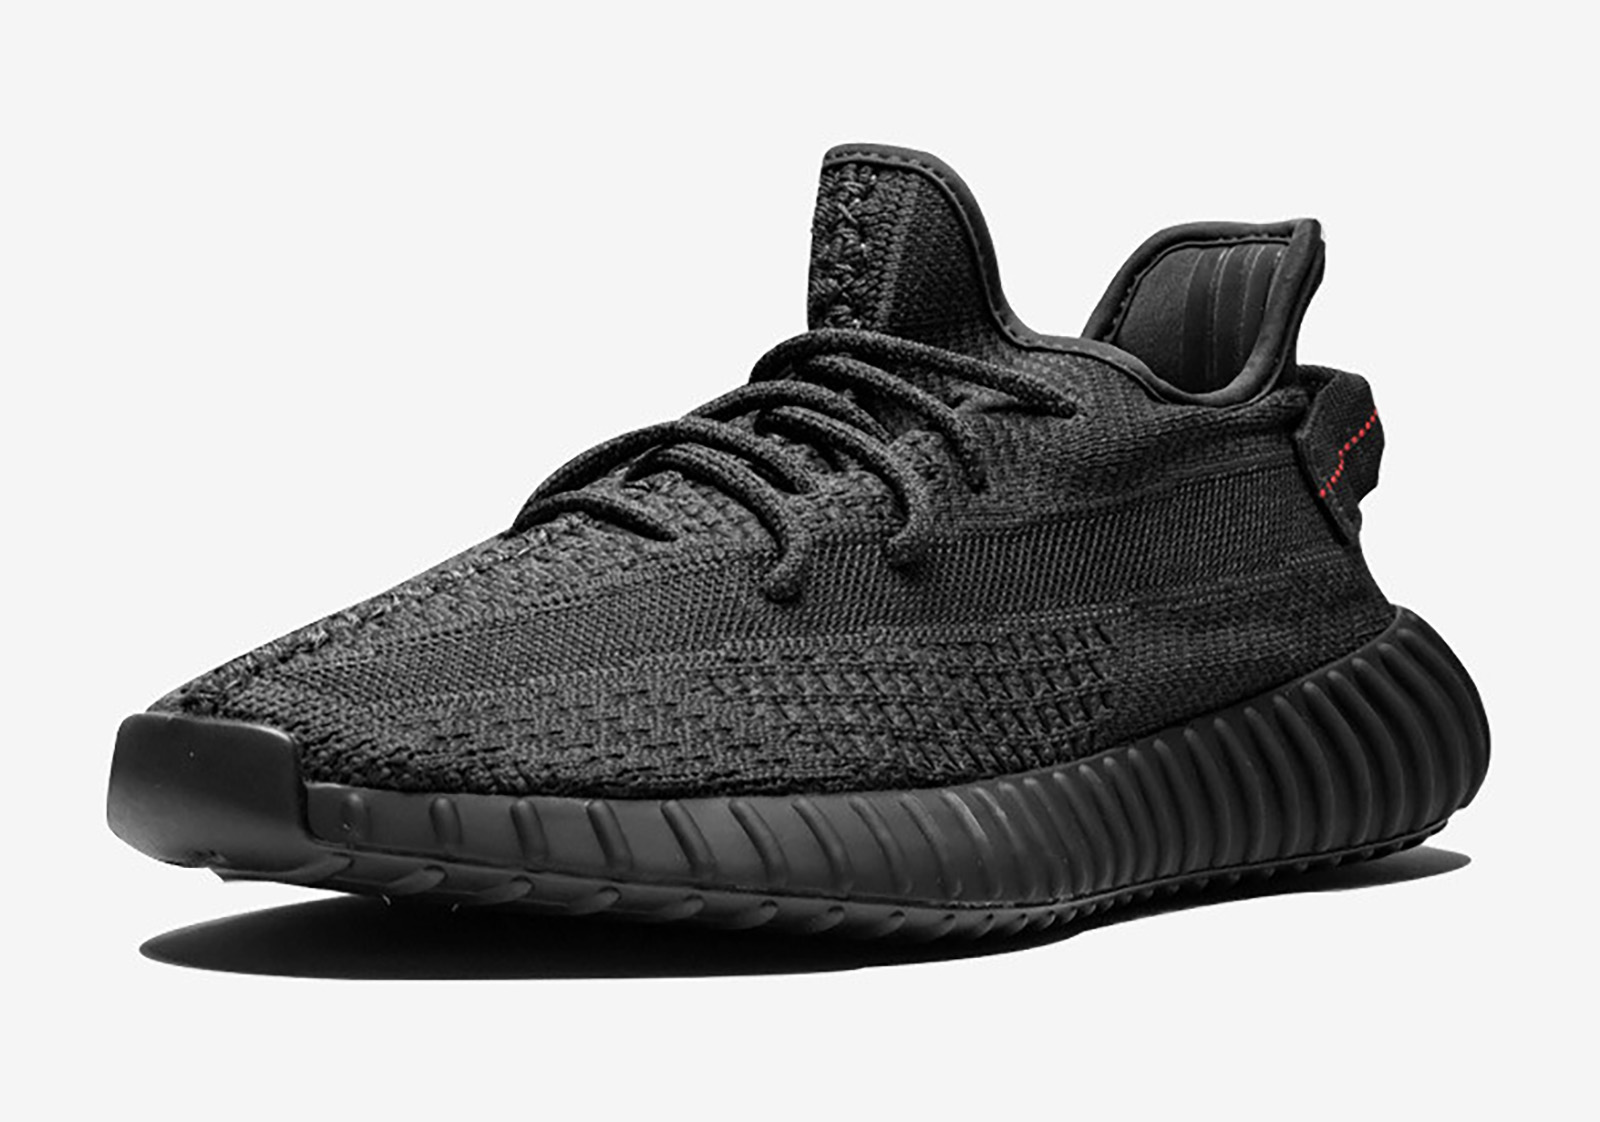 Adidas Yeezy Boost 350 V2: Shoppers 